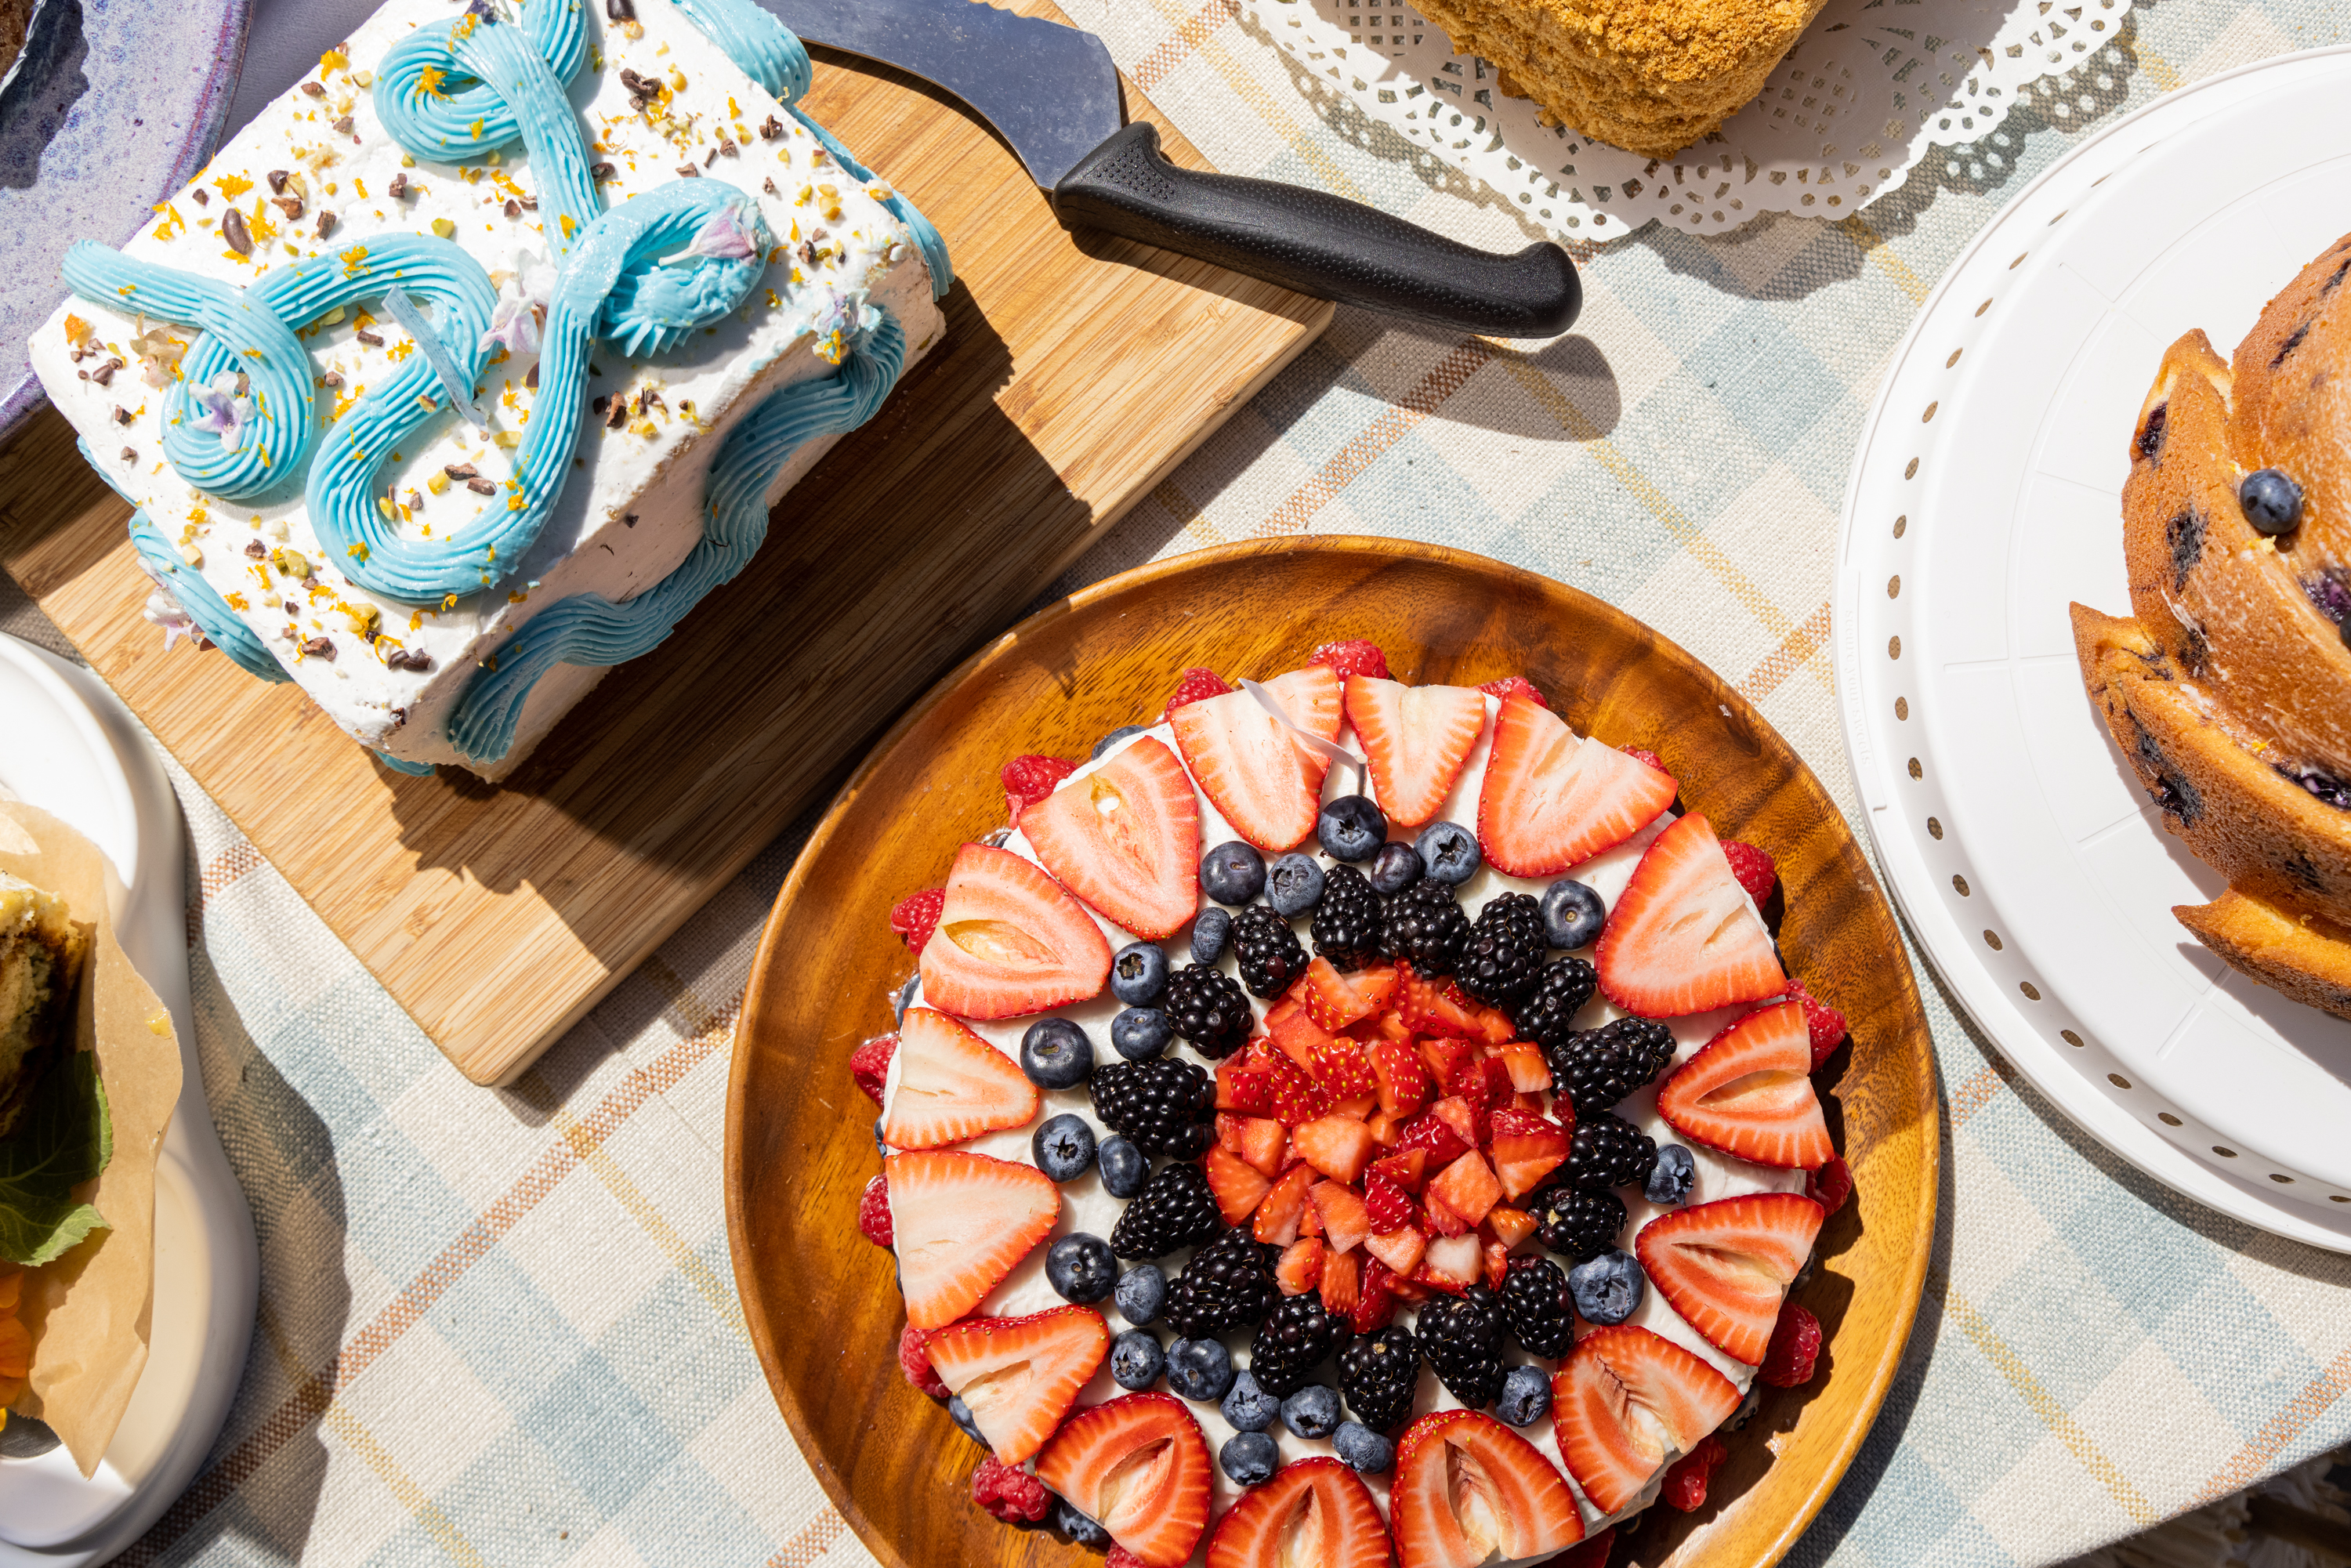 An array of desserts on a sunny table with a fruit tart, a blue swirl-topped cake, and a blueberry cake.